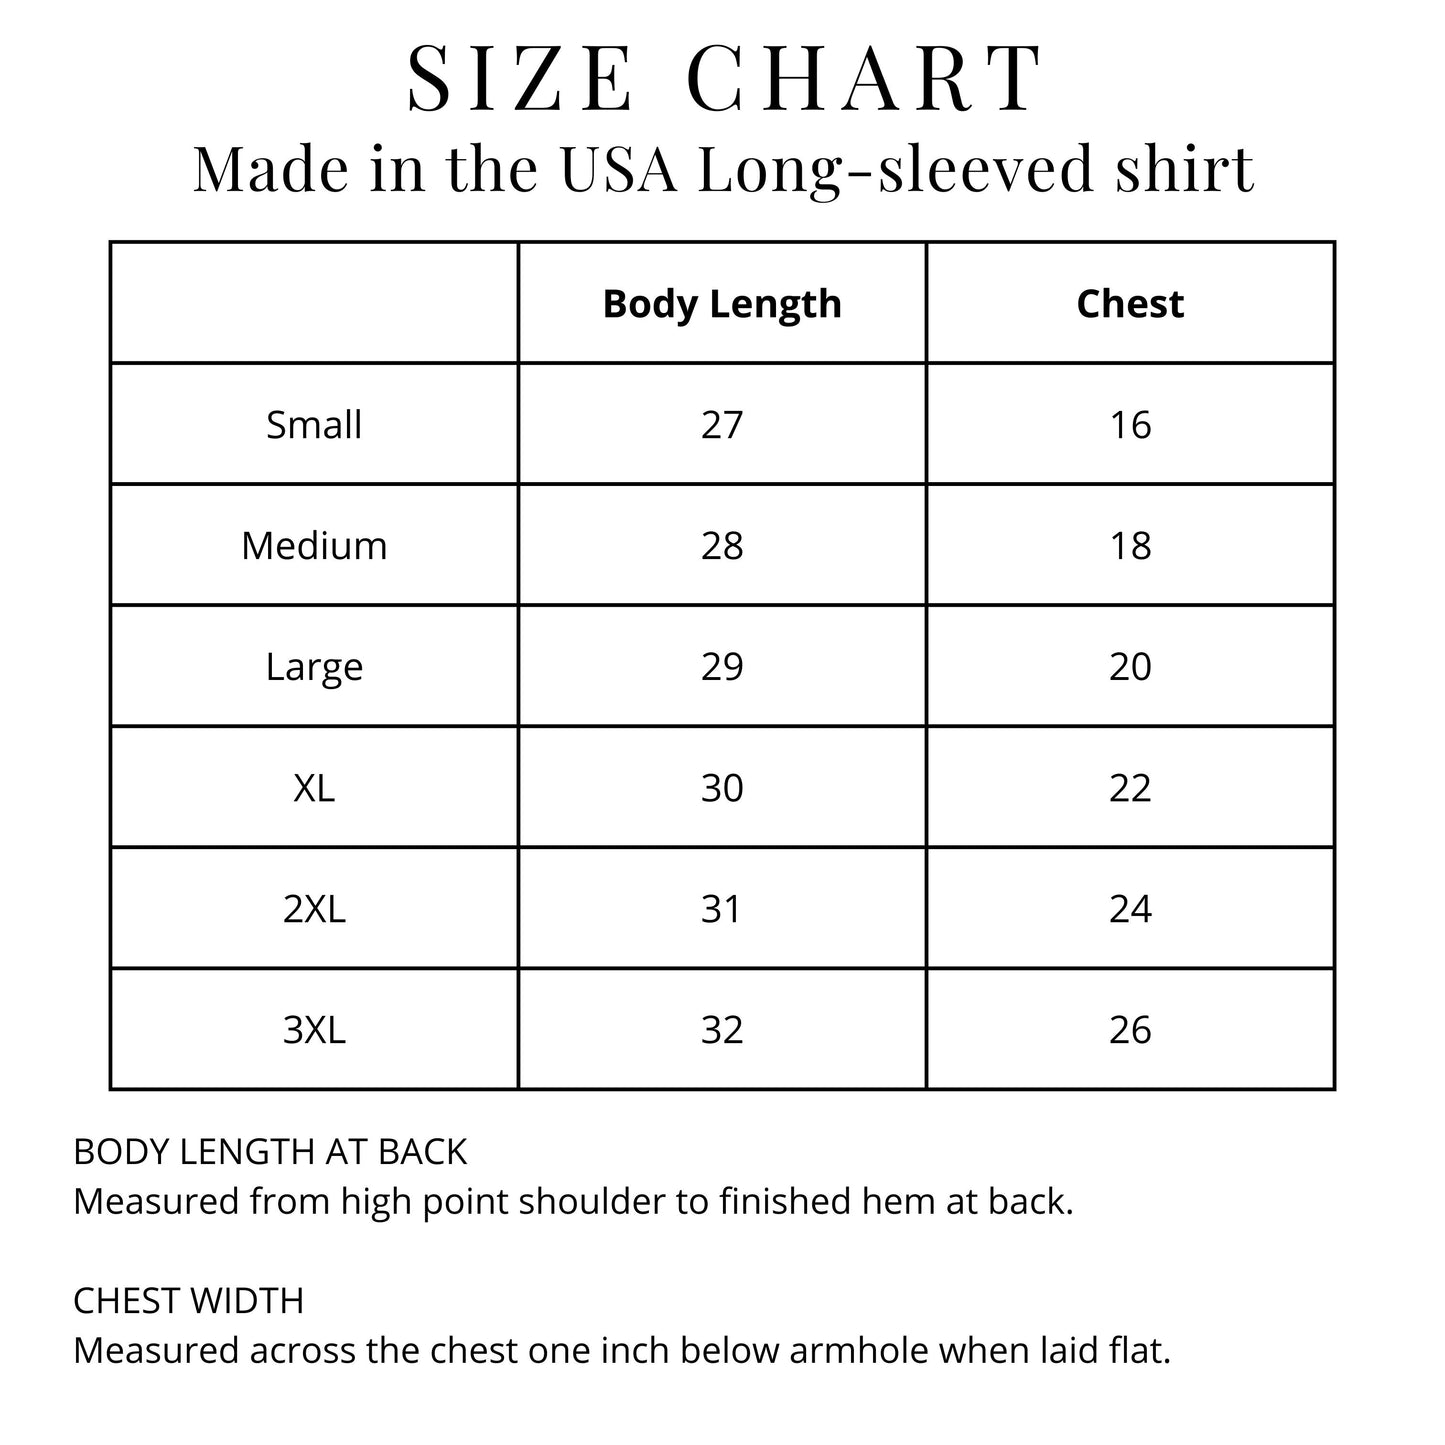 Size chart for Made in the USA long-sleeved shirts from The History List store